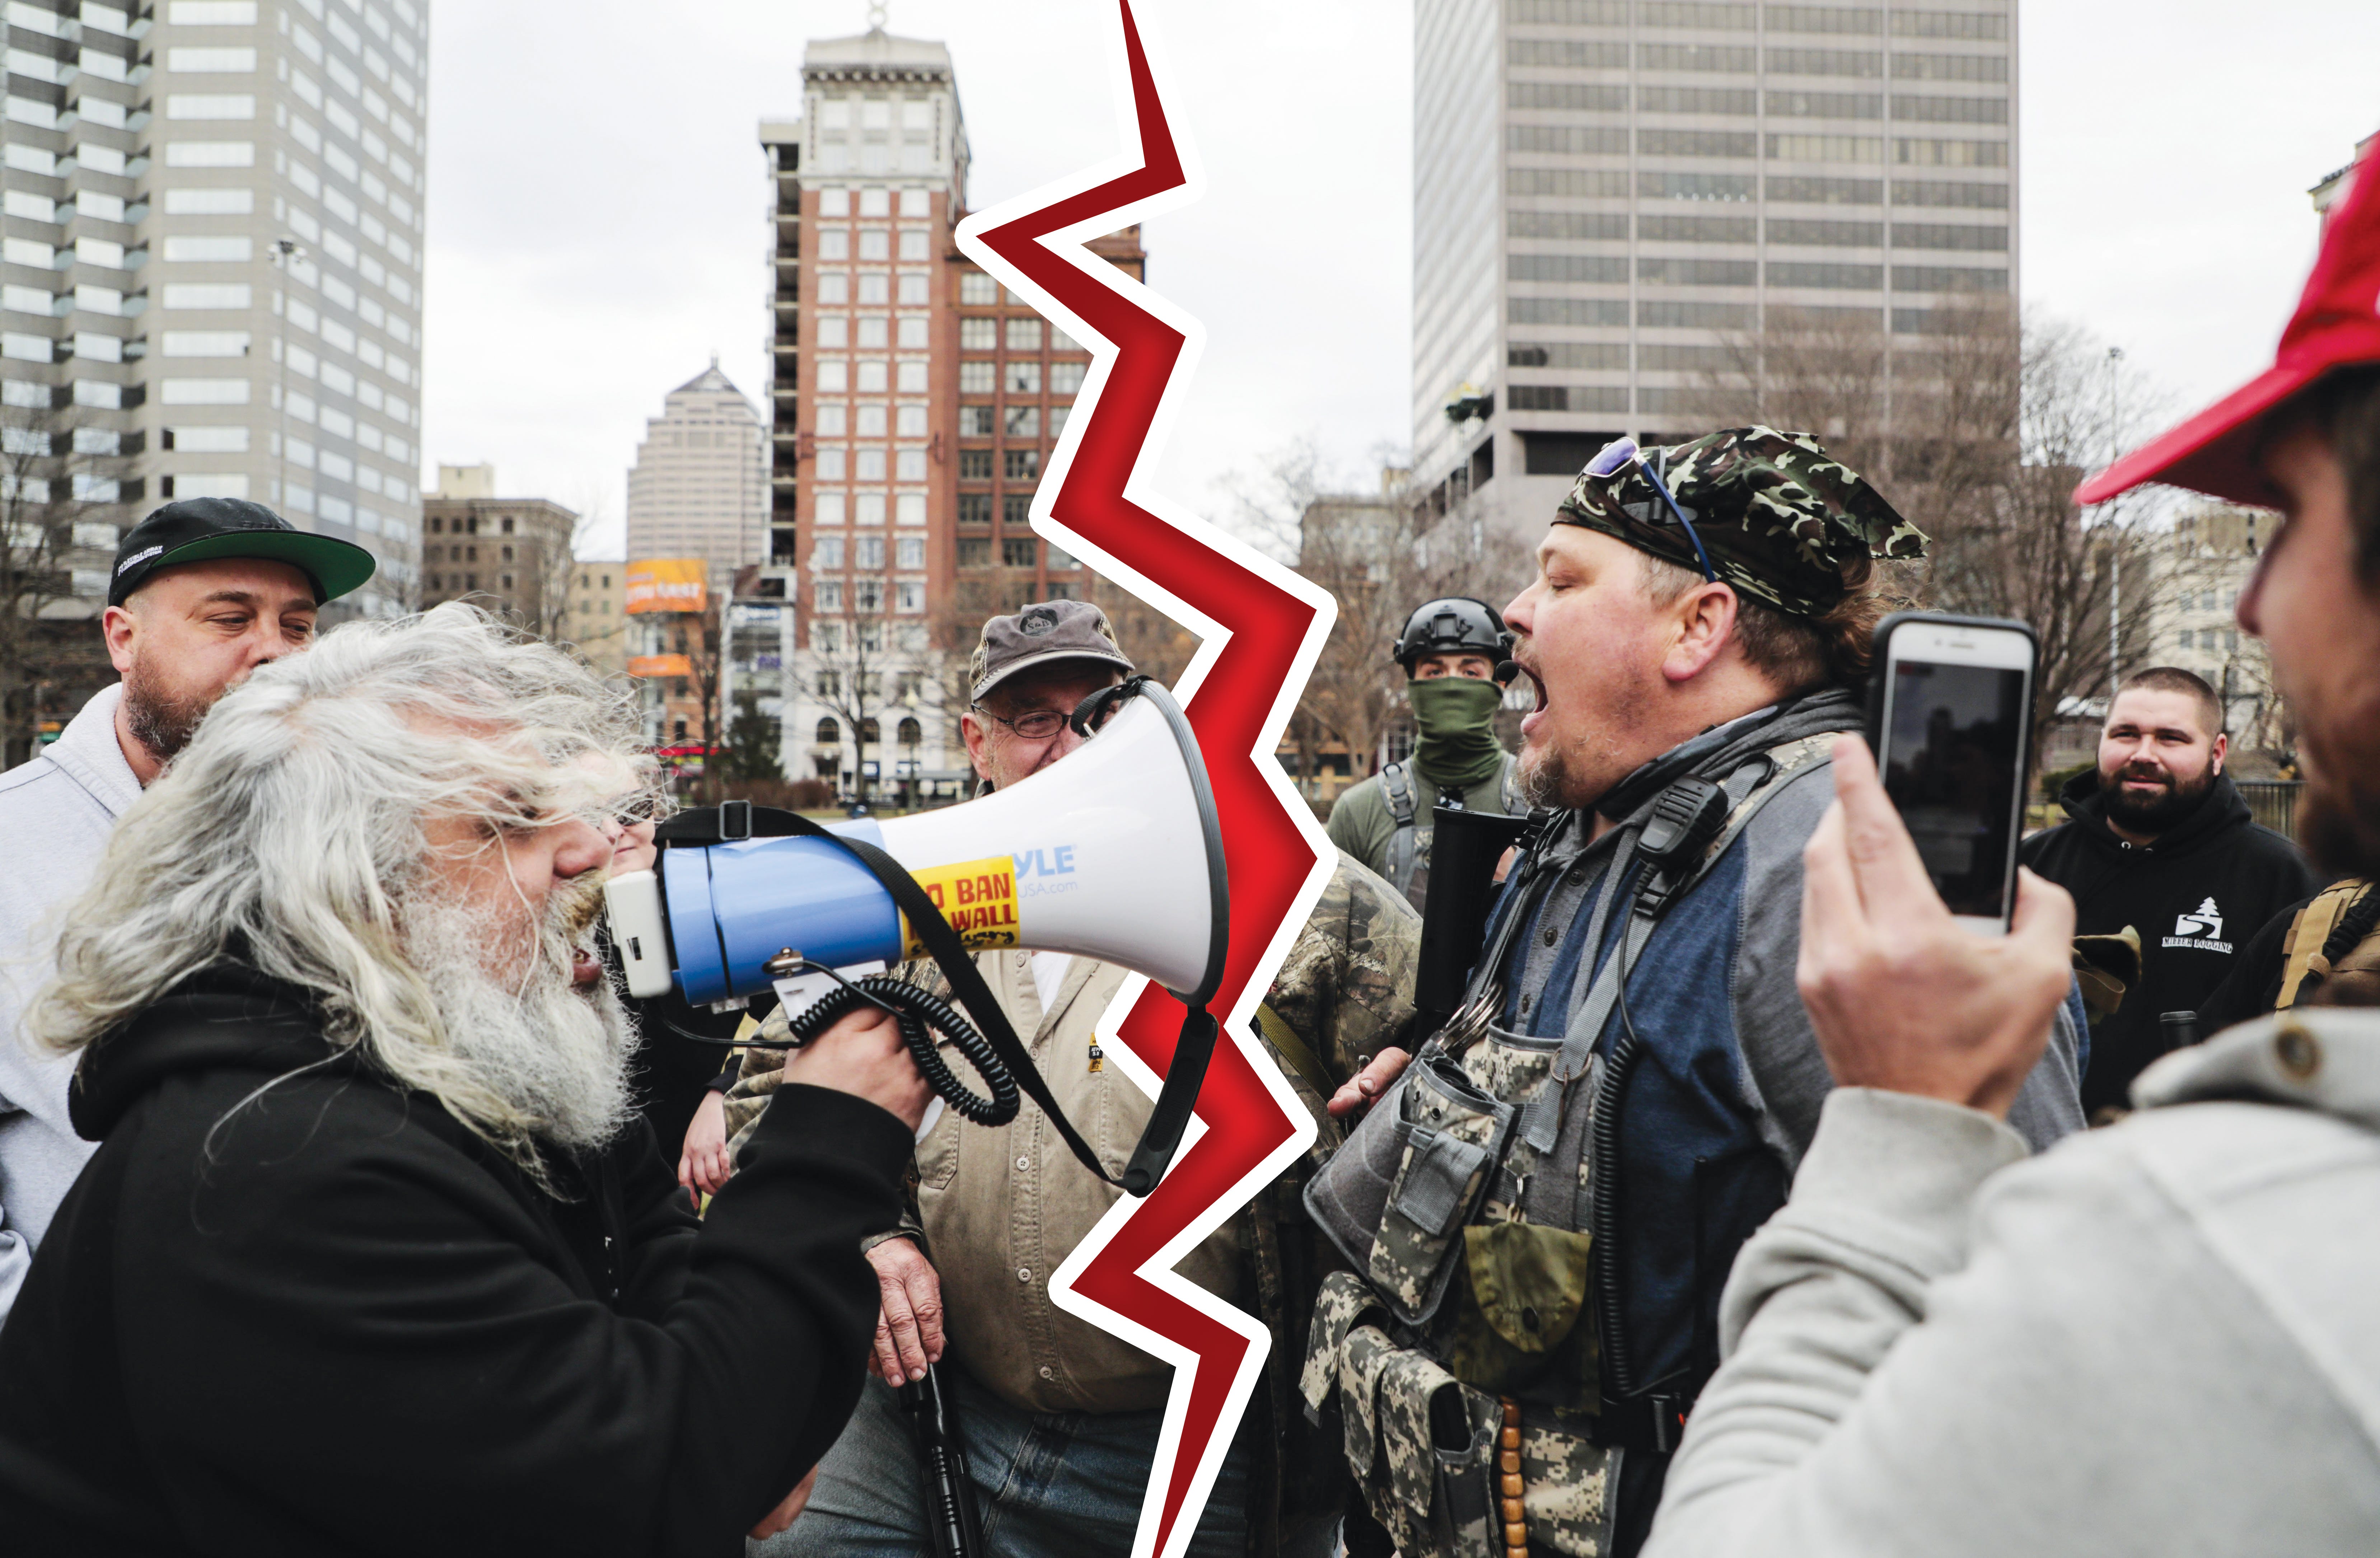 Counter-demonstrators and supporters of a pro-Second Amendment rally yell at each other on Thursday, March 28, 2019 at the Ohio Statehouse in Columbus, Ohio.